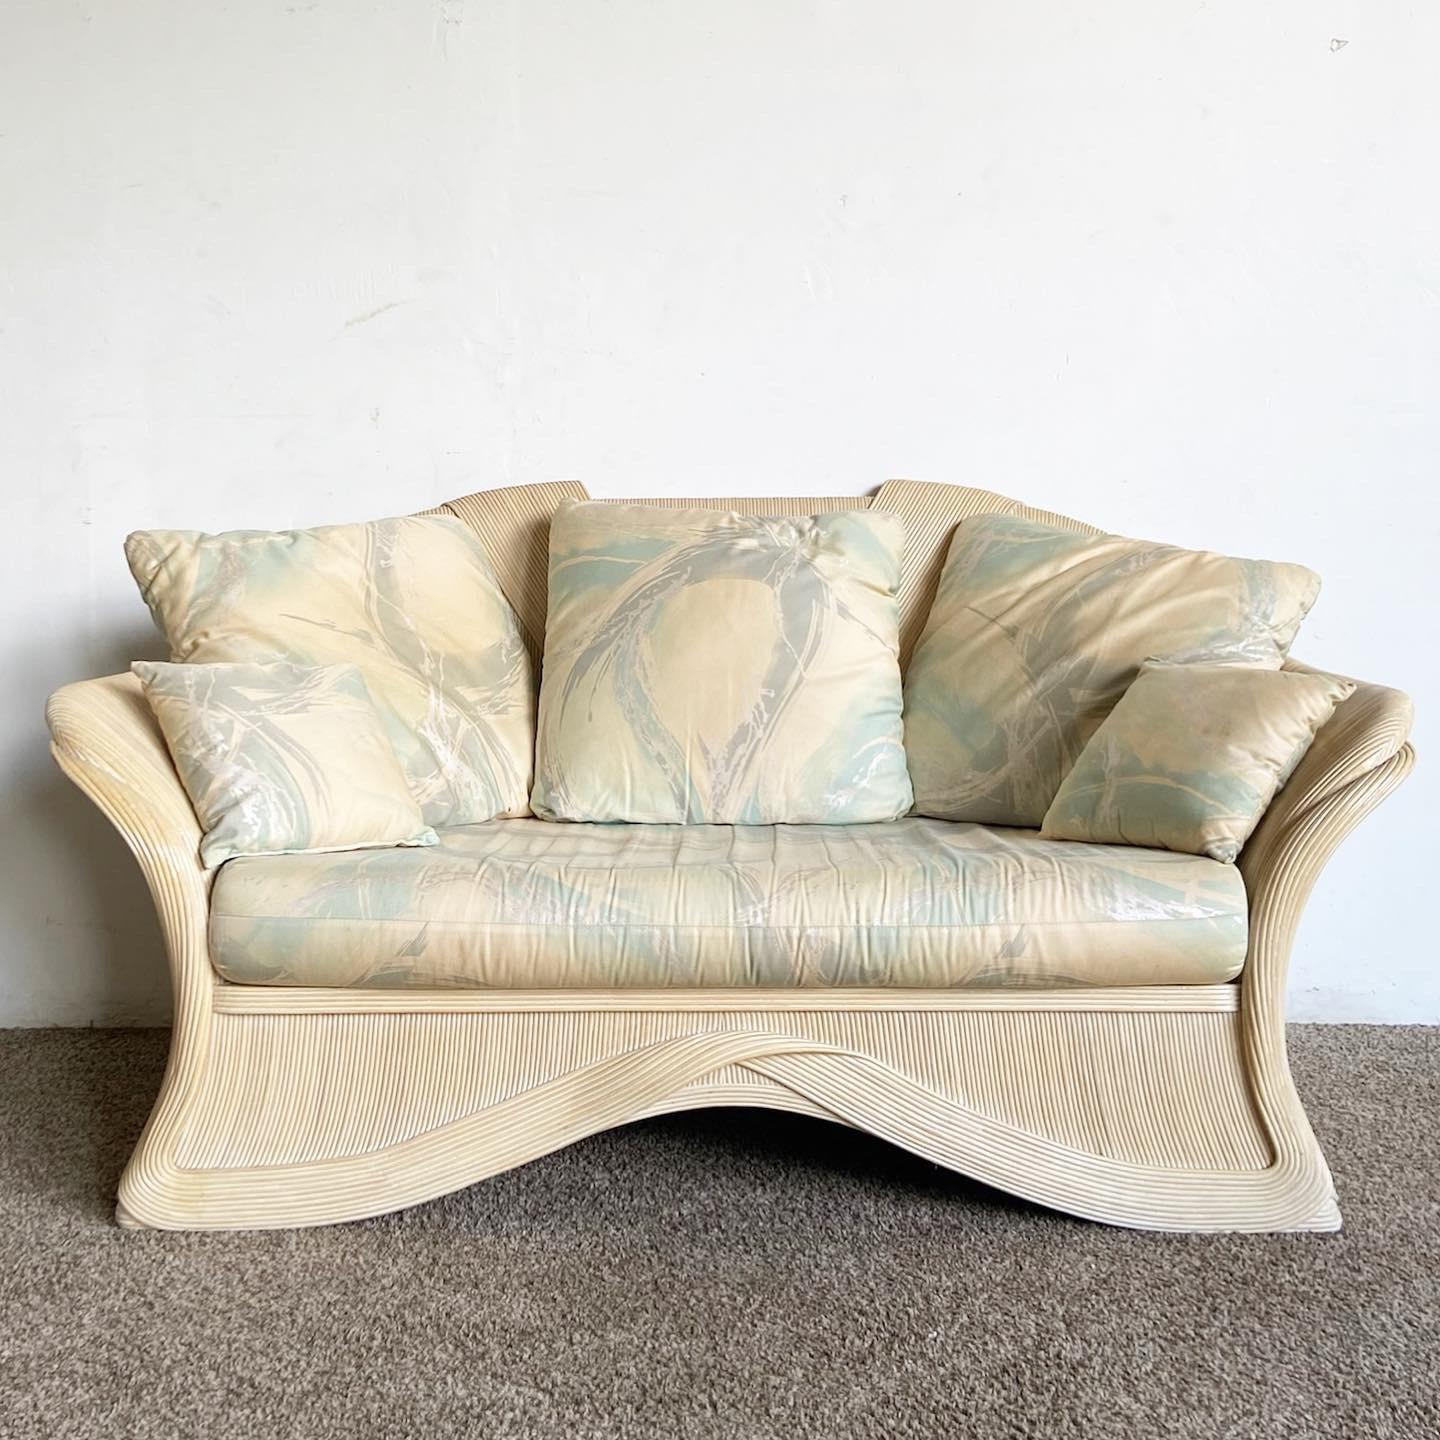 Our Boho Chic Sculpted Pencil Reed Ribbon Loveseat Sofa combines comfort and style. Its unique pencil reed design and plush cushions provide a perfect boho touch to any space.

Boho Chic design for a unique style.
Sculpted Pencil Reed Ribbon for